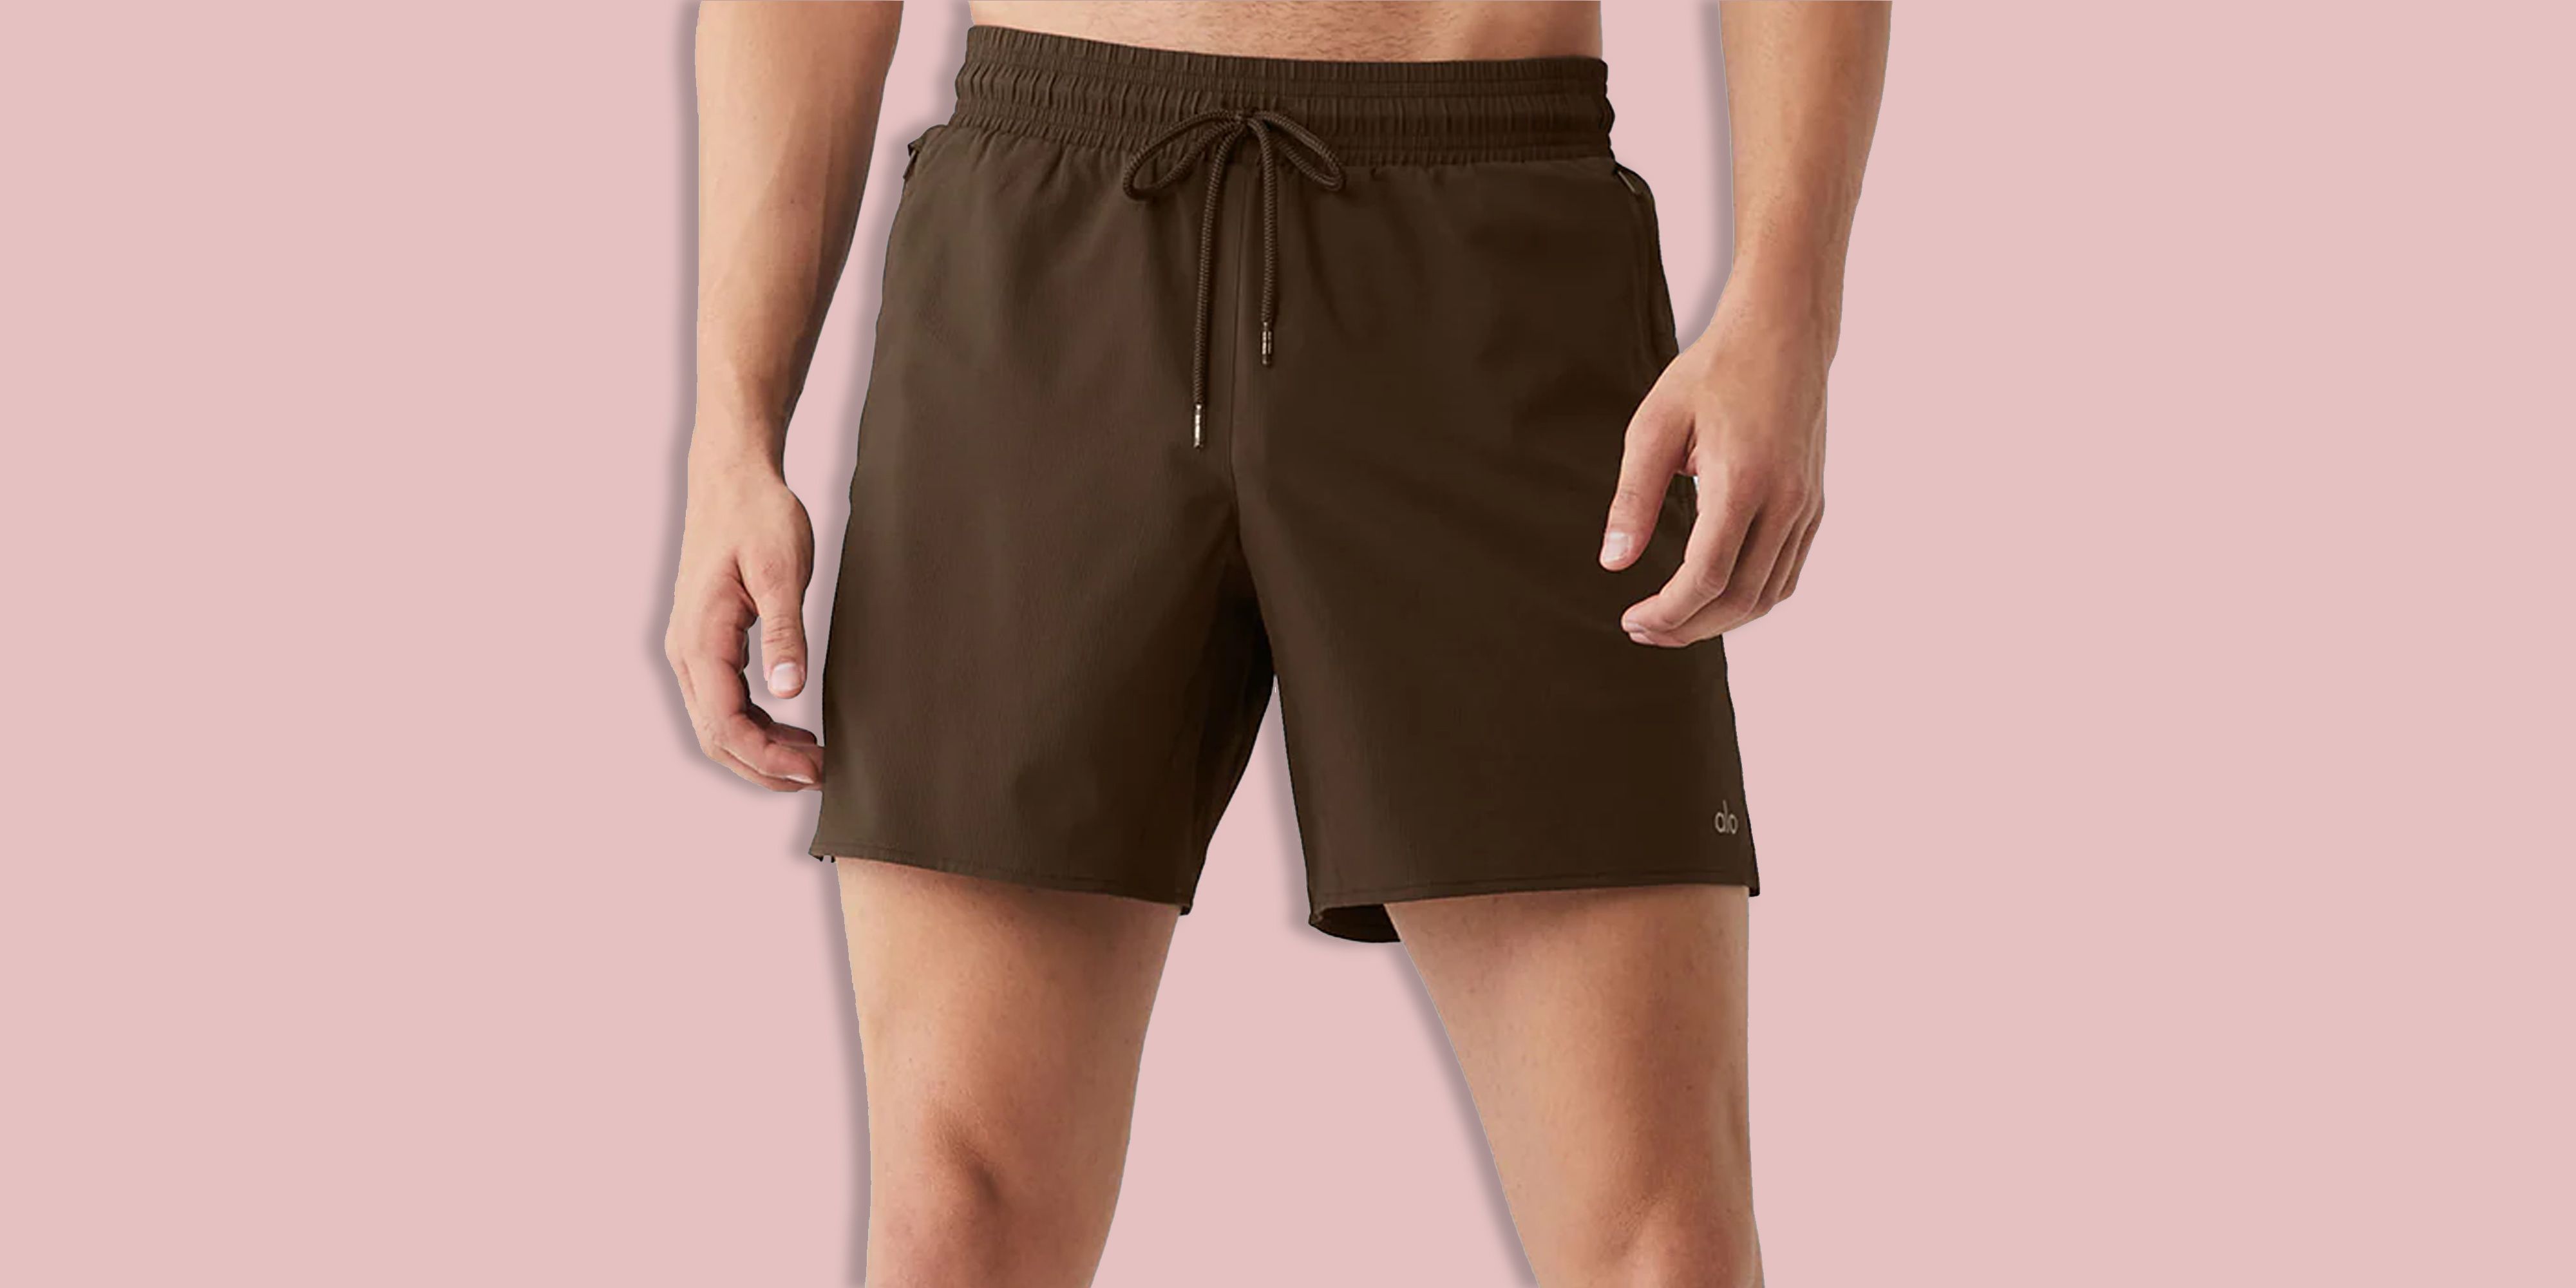 The 22 Best Gym Shorts for Working Out